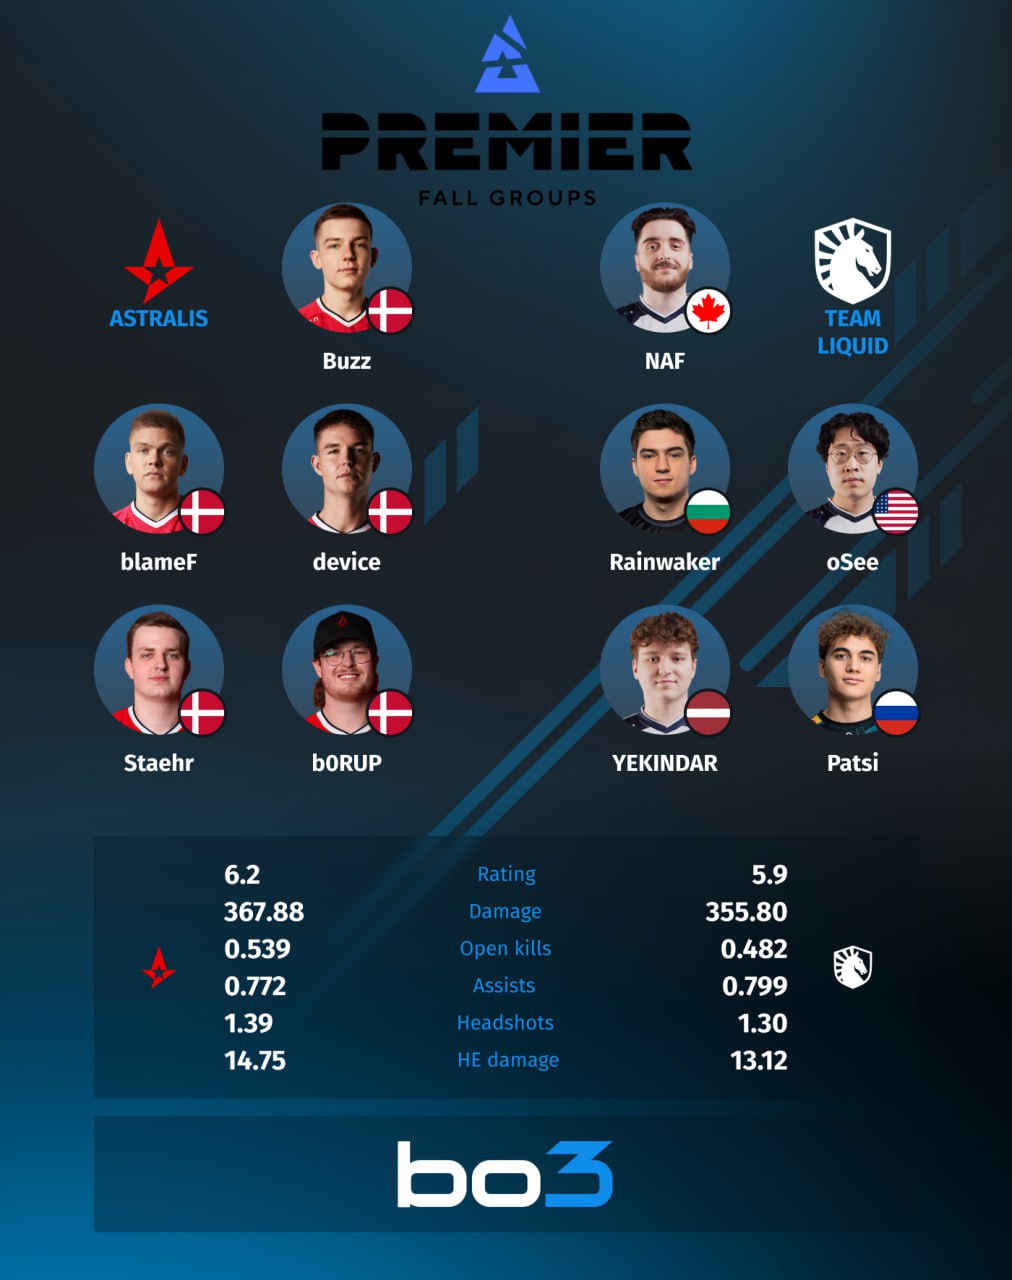 Average Statistics of Astralis and Team Liquid in New Rosters